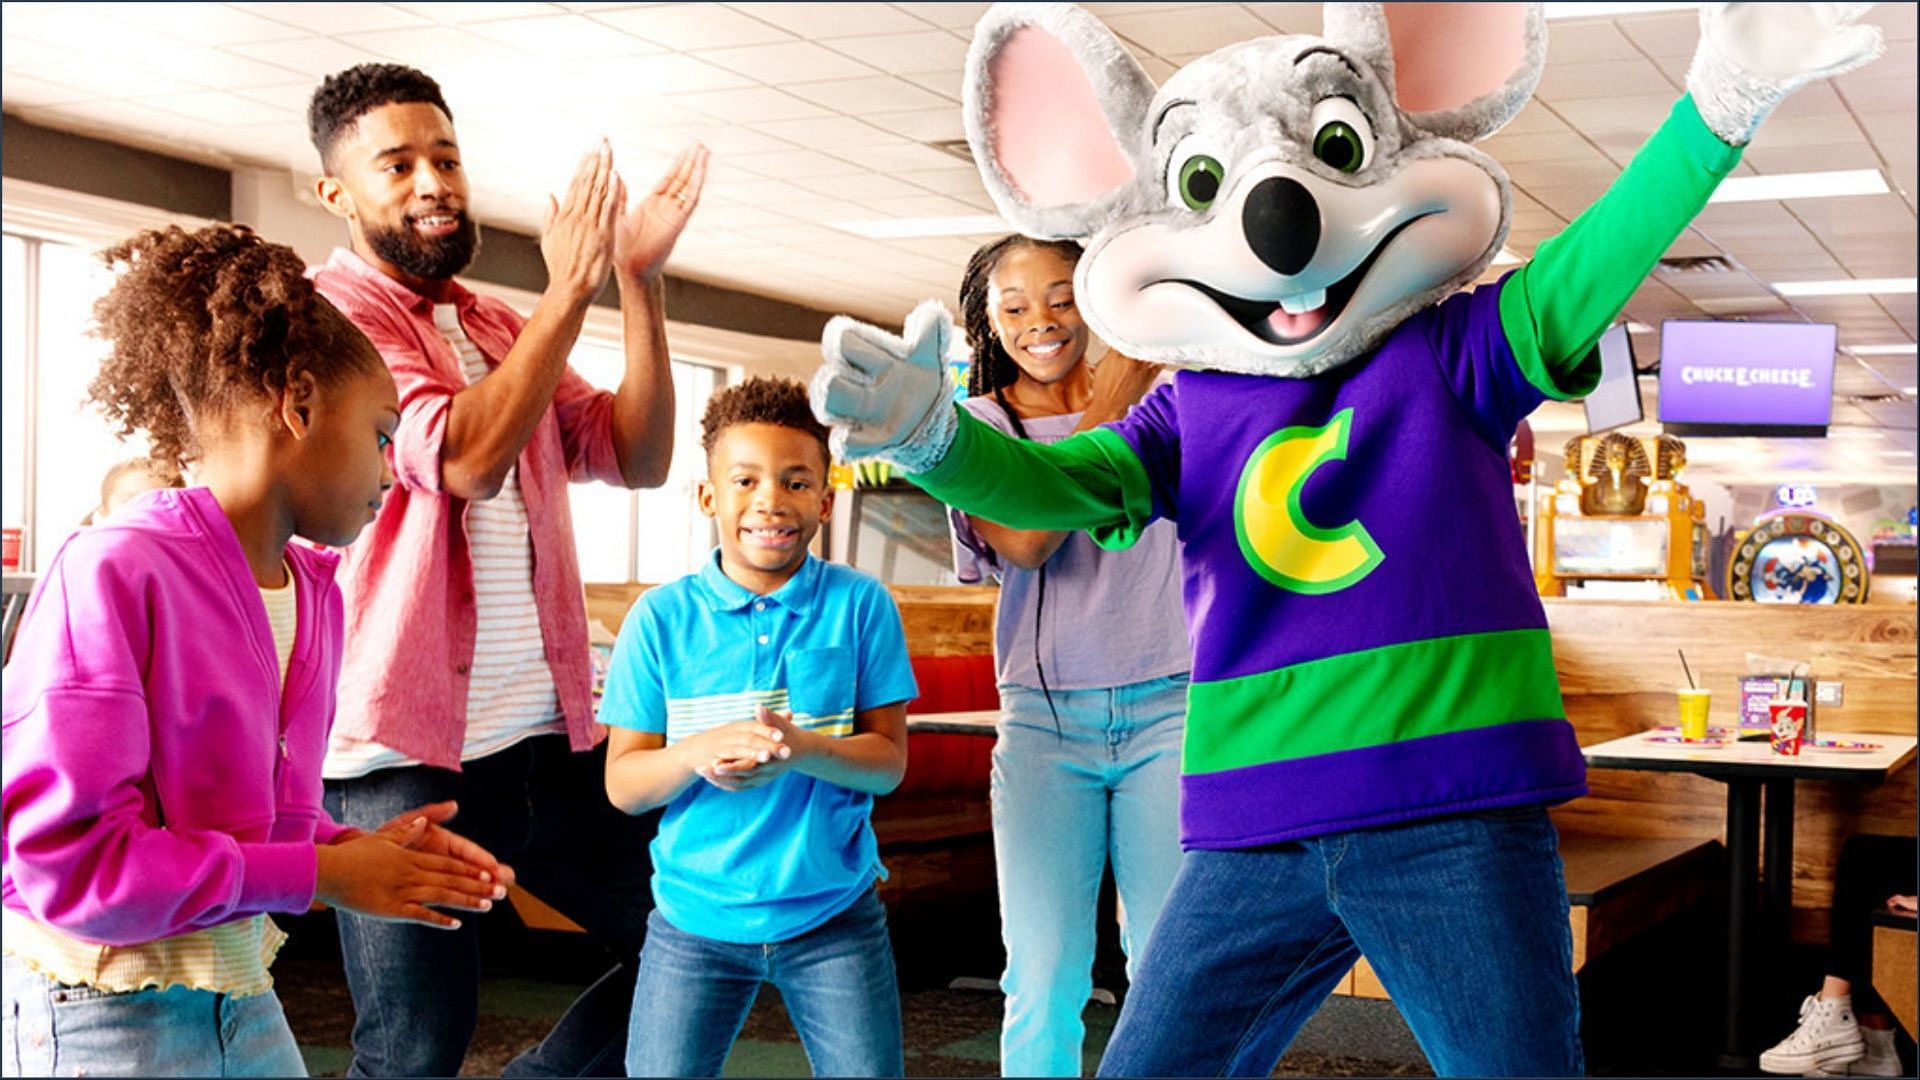 Chuck E. locations will now feature a wide range of new enhancements like interactive dance floors and kids-focused arcade games (Image via Chuck E Cheese)